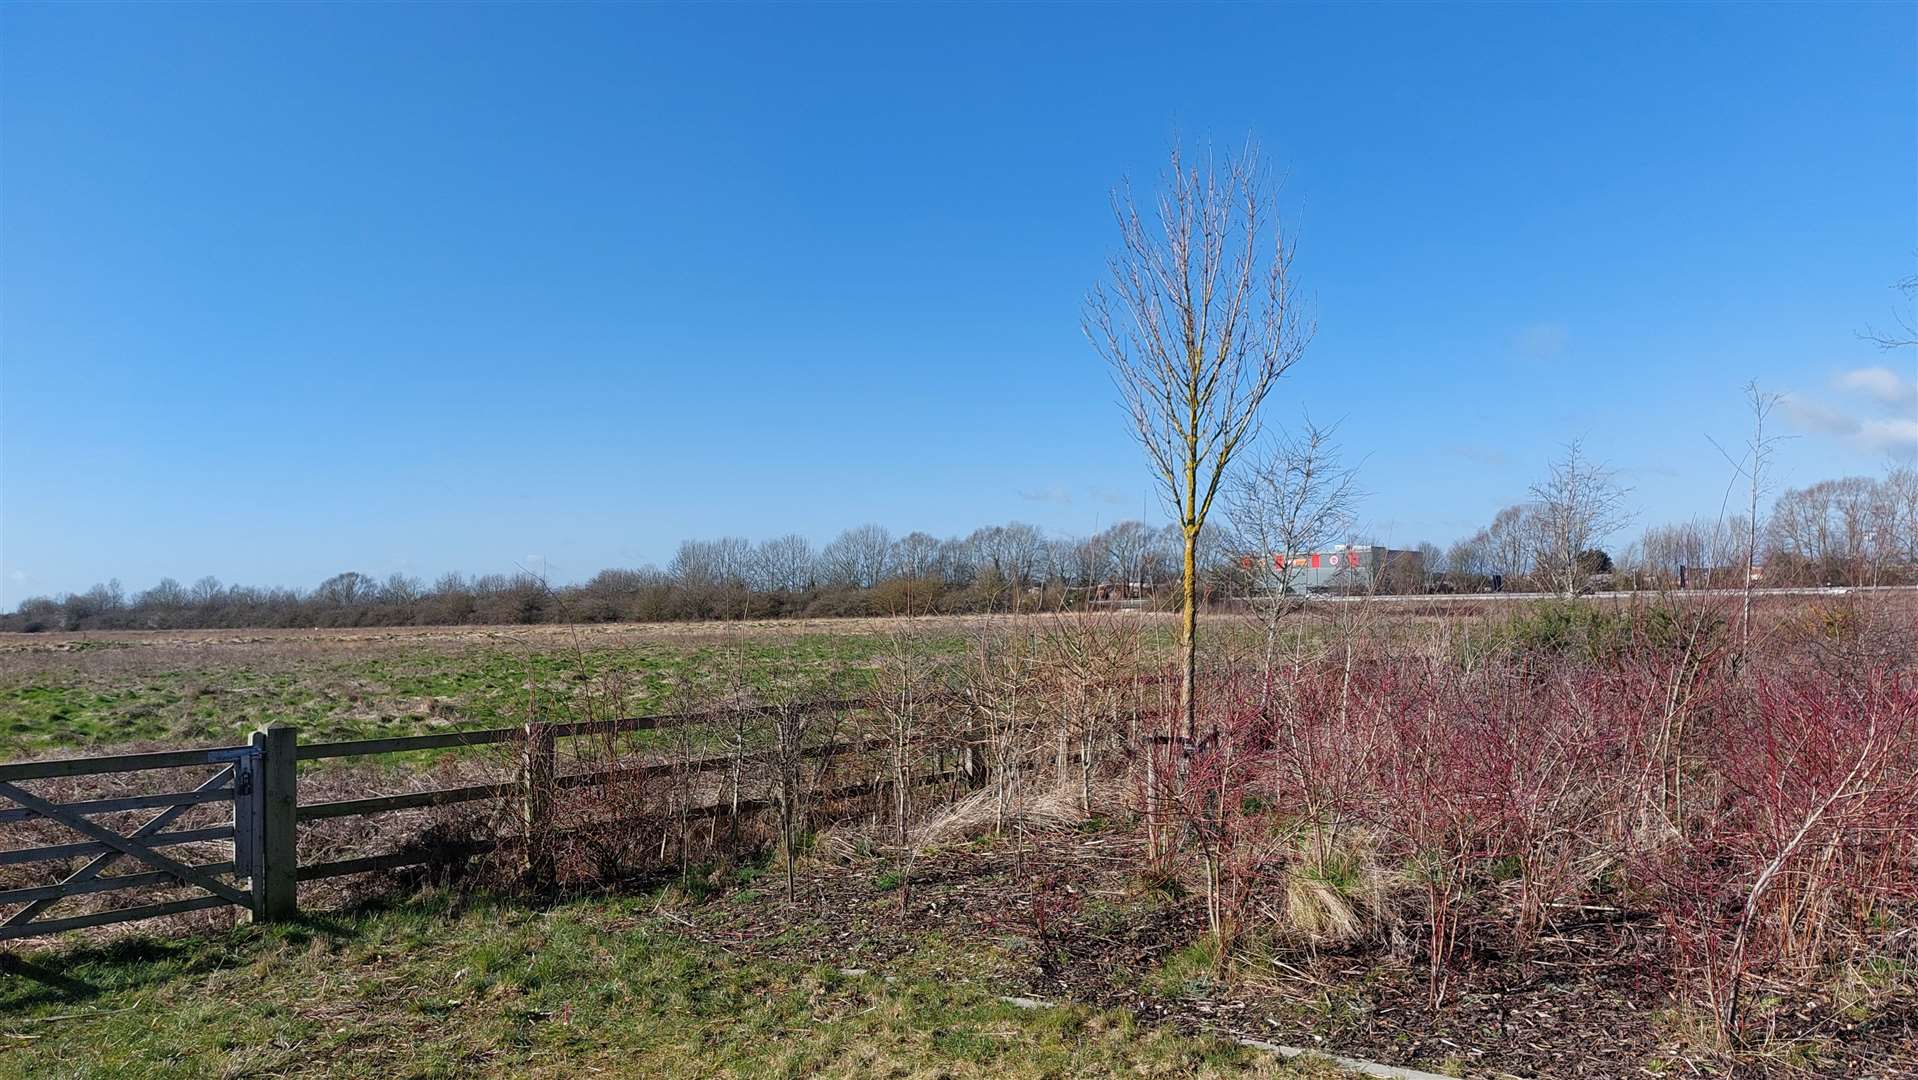 The land next to Asda is earmarked for the development